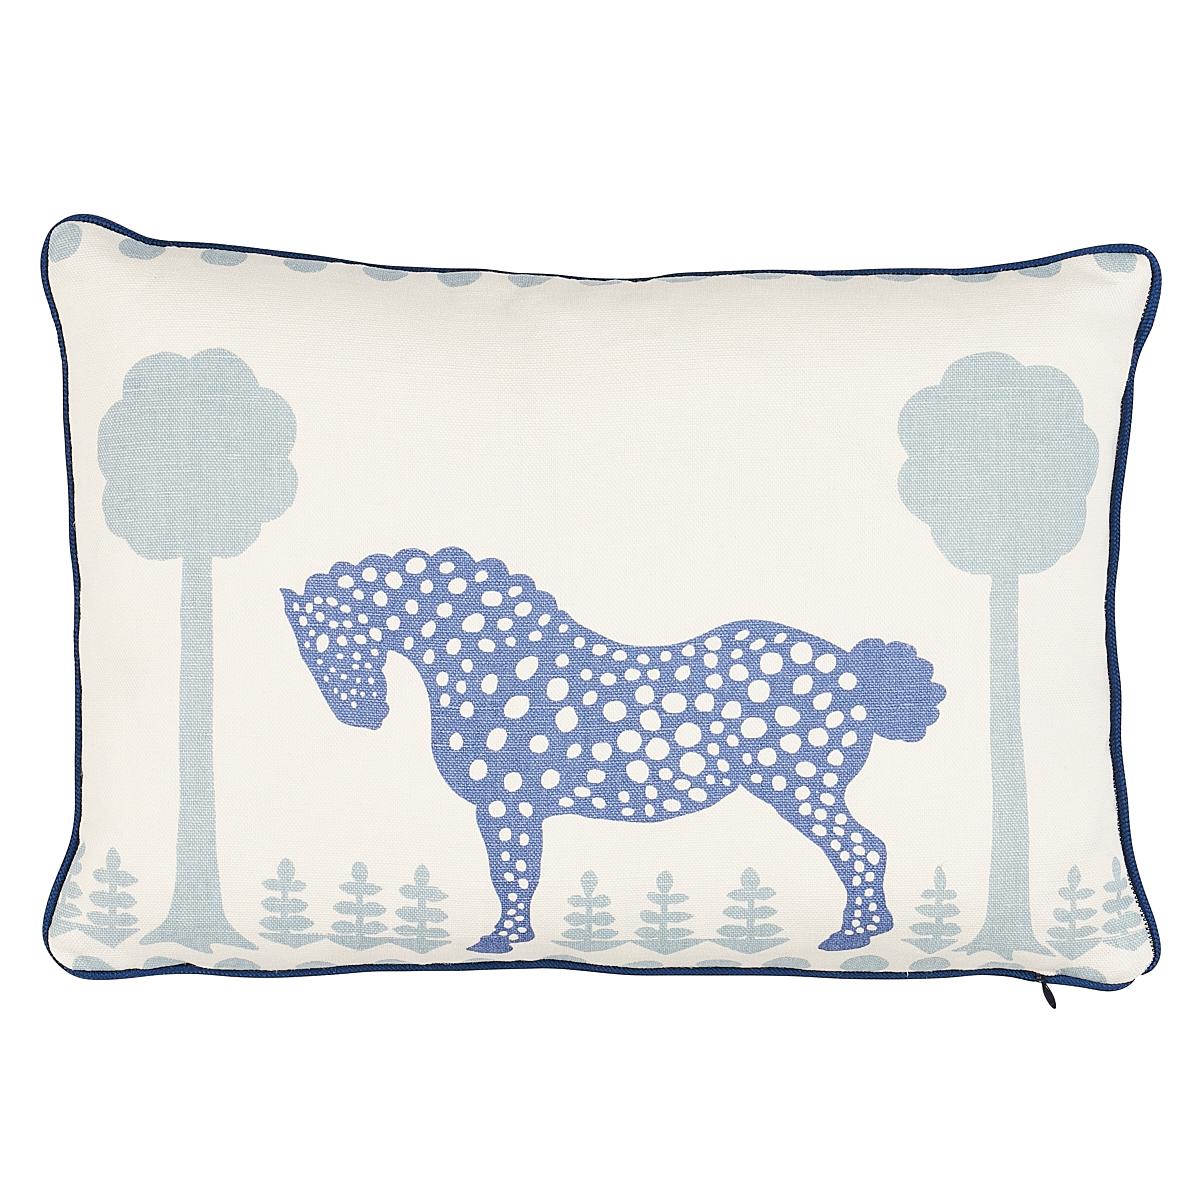 This pillow features Polka Dot Pony. Inspired by a midcentury pattern in our archive, Polka-Dot Pony in blue is a charming, whimsical design with modern appeal. Rows of stylized equine silhouettes create a large-scale stripe effect with the graphic